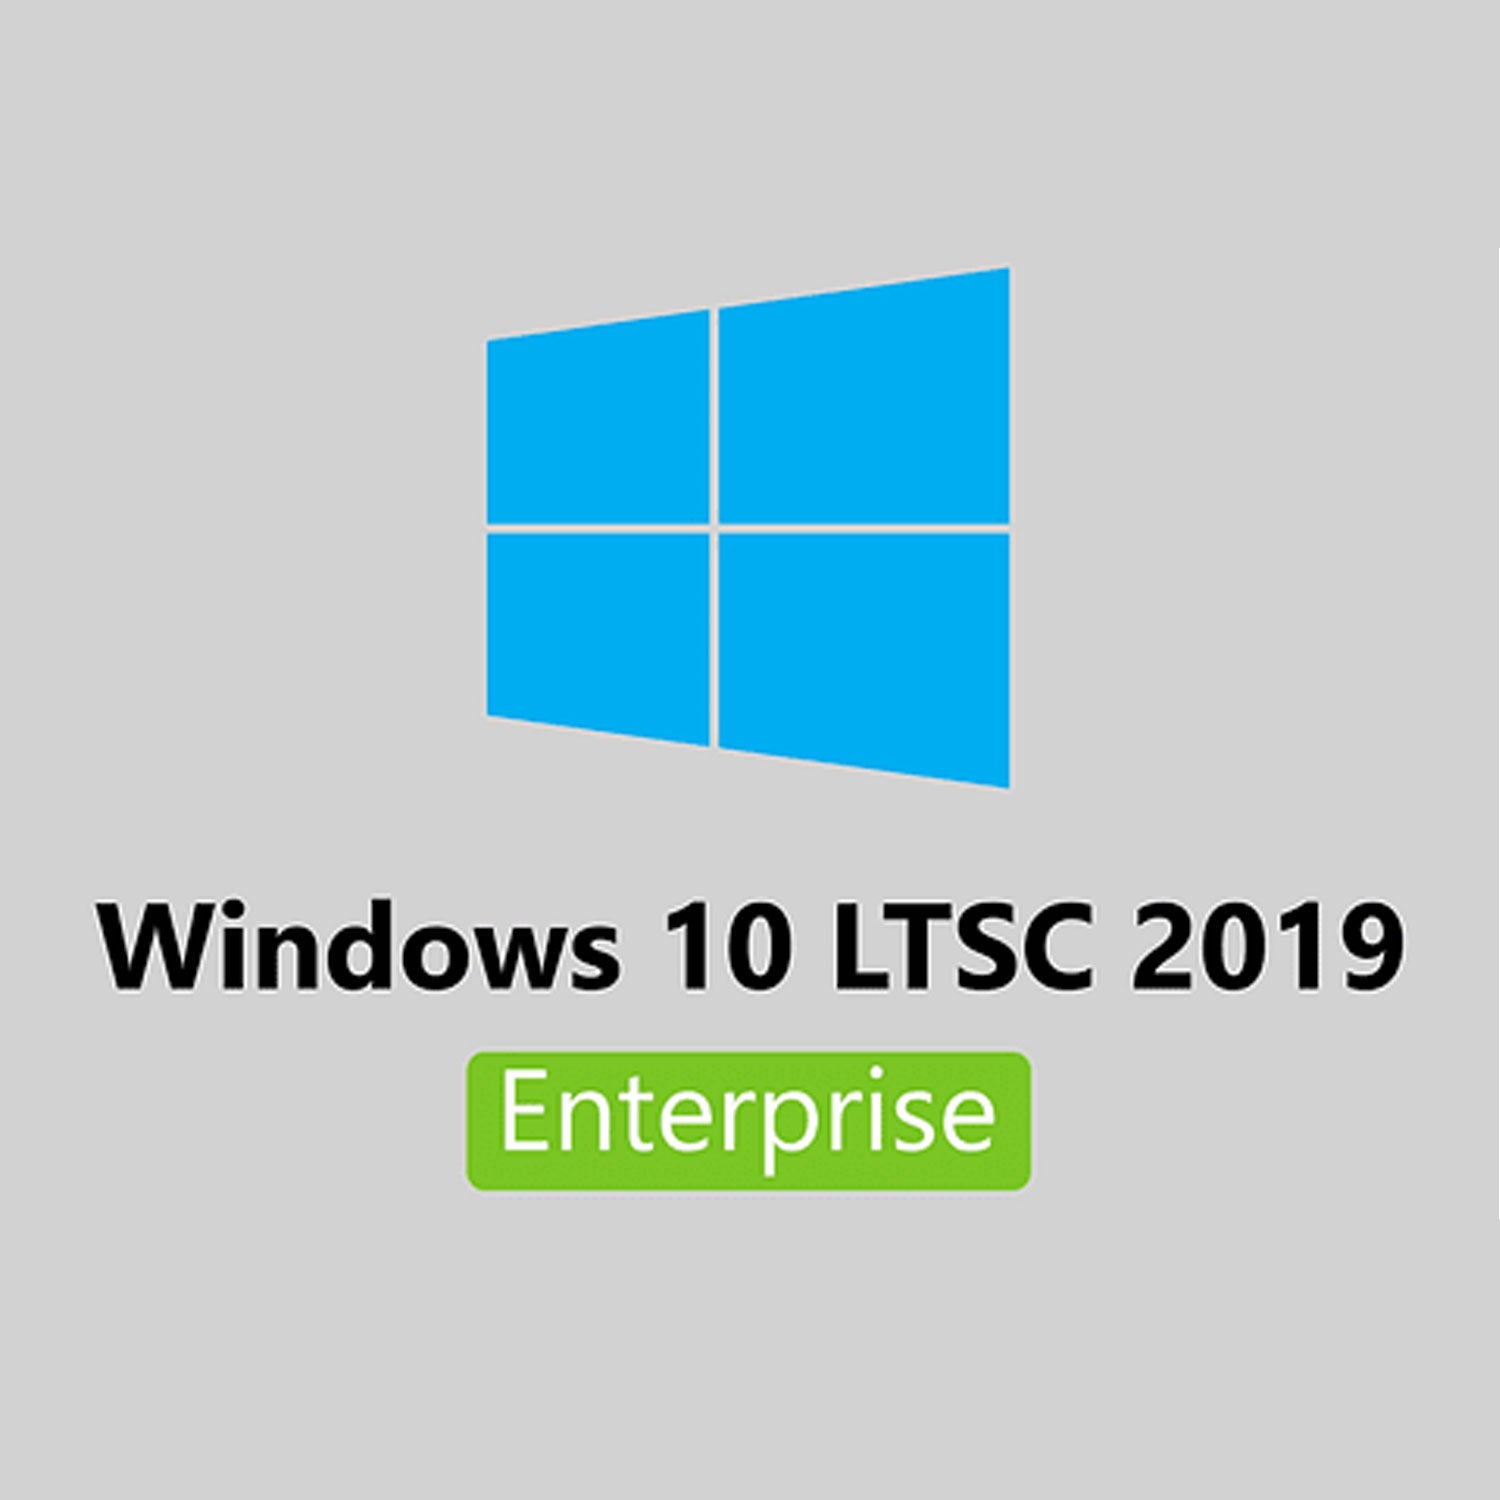 Windows 11 Pro for workstation product key License digital ESD instant